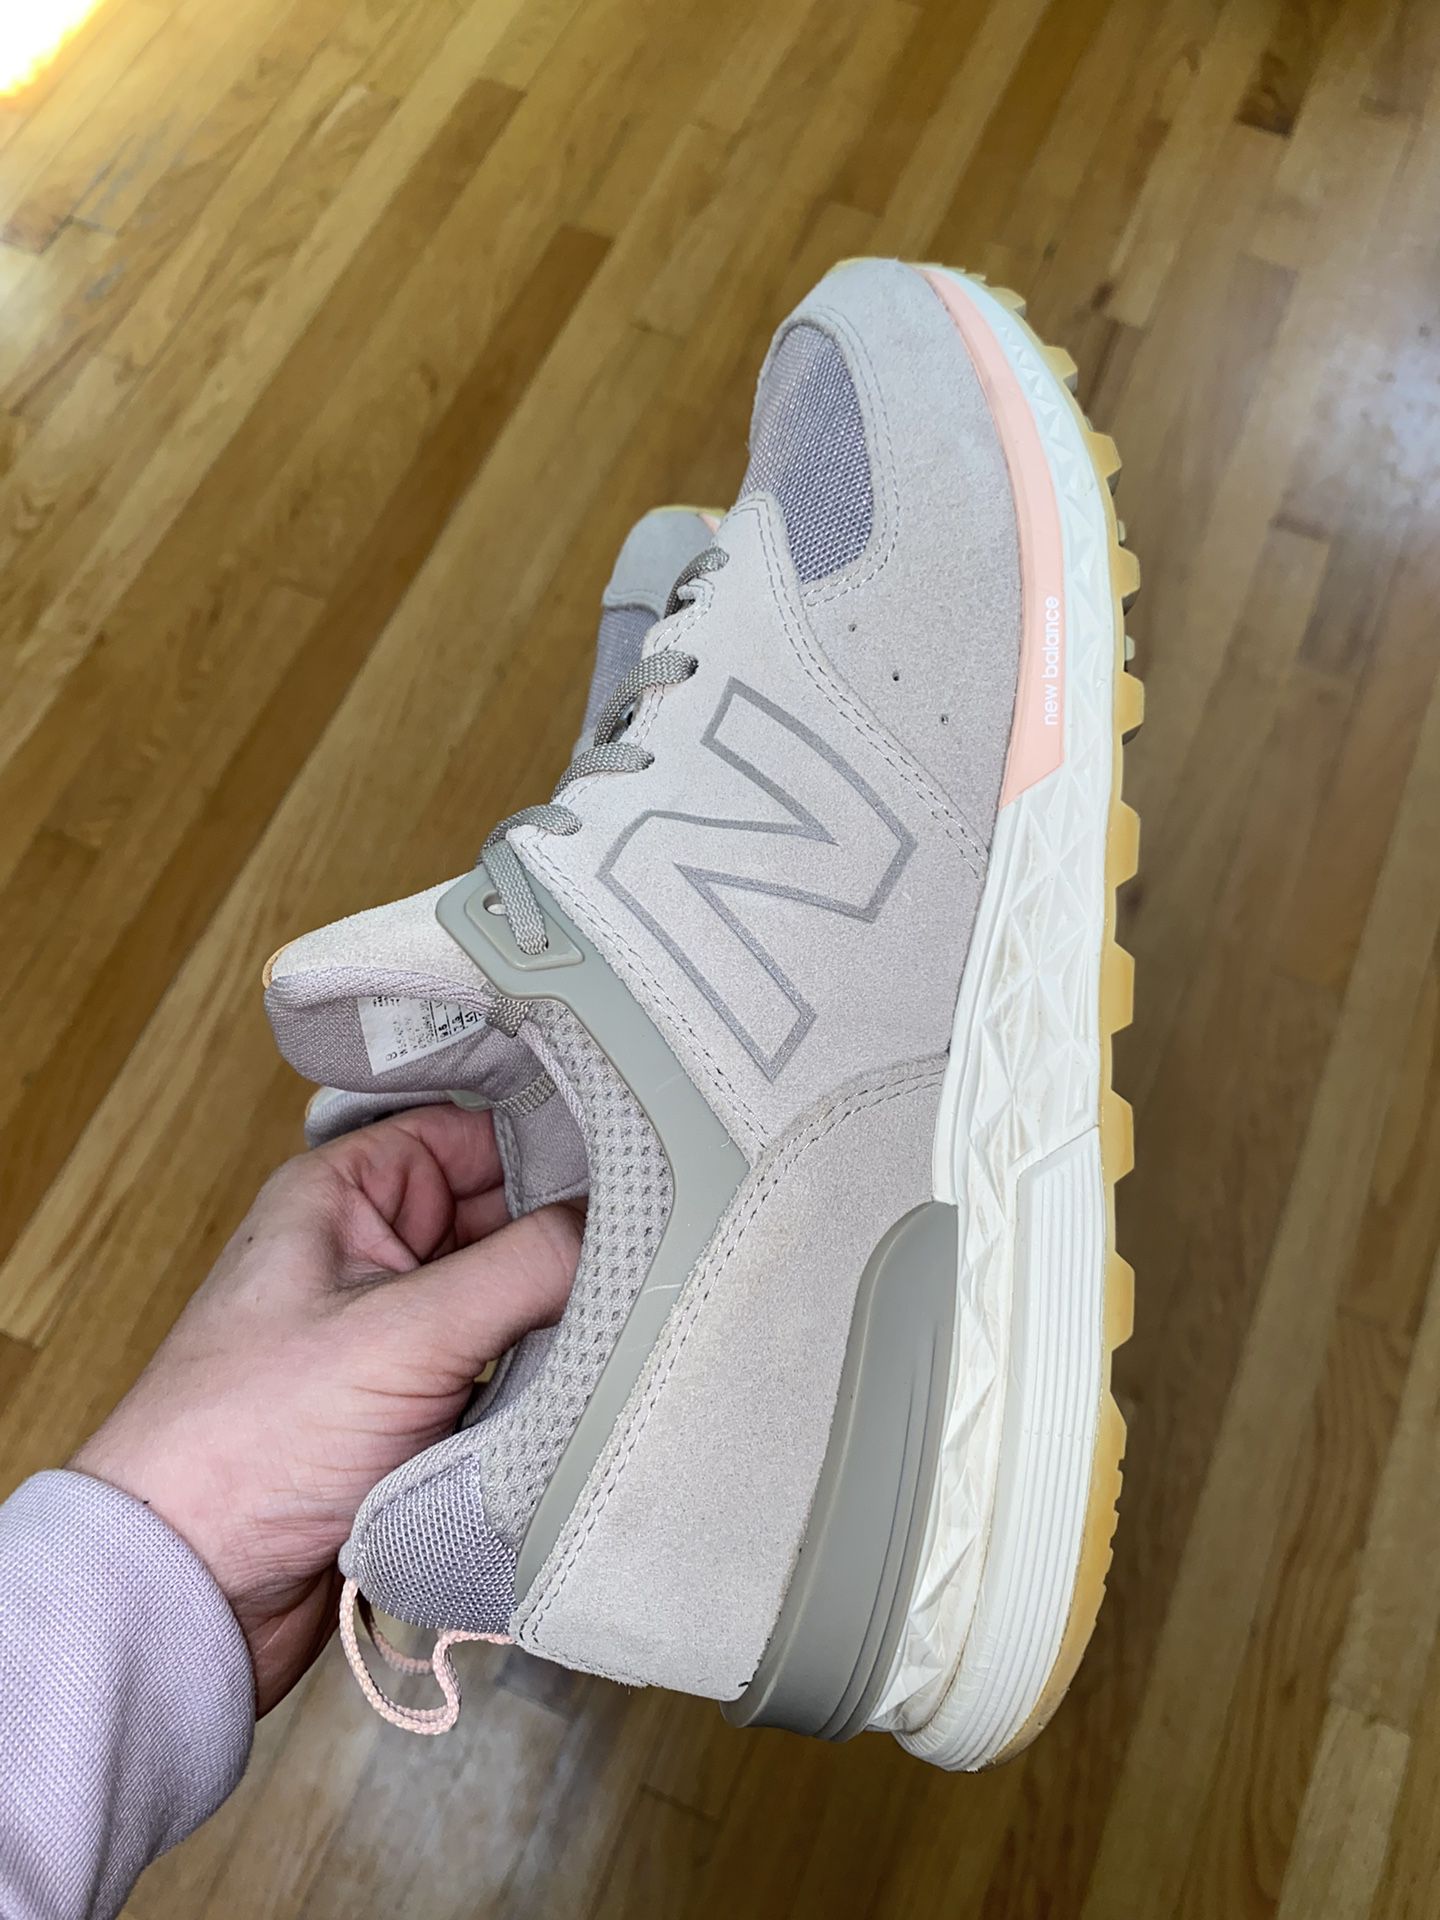 New Balance 574 Sport Beige WS574PMC Size 9.5 for Sale in Tappan, - OfferUp